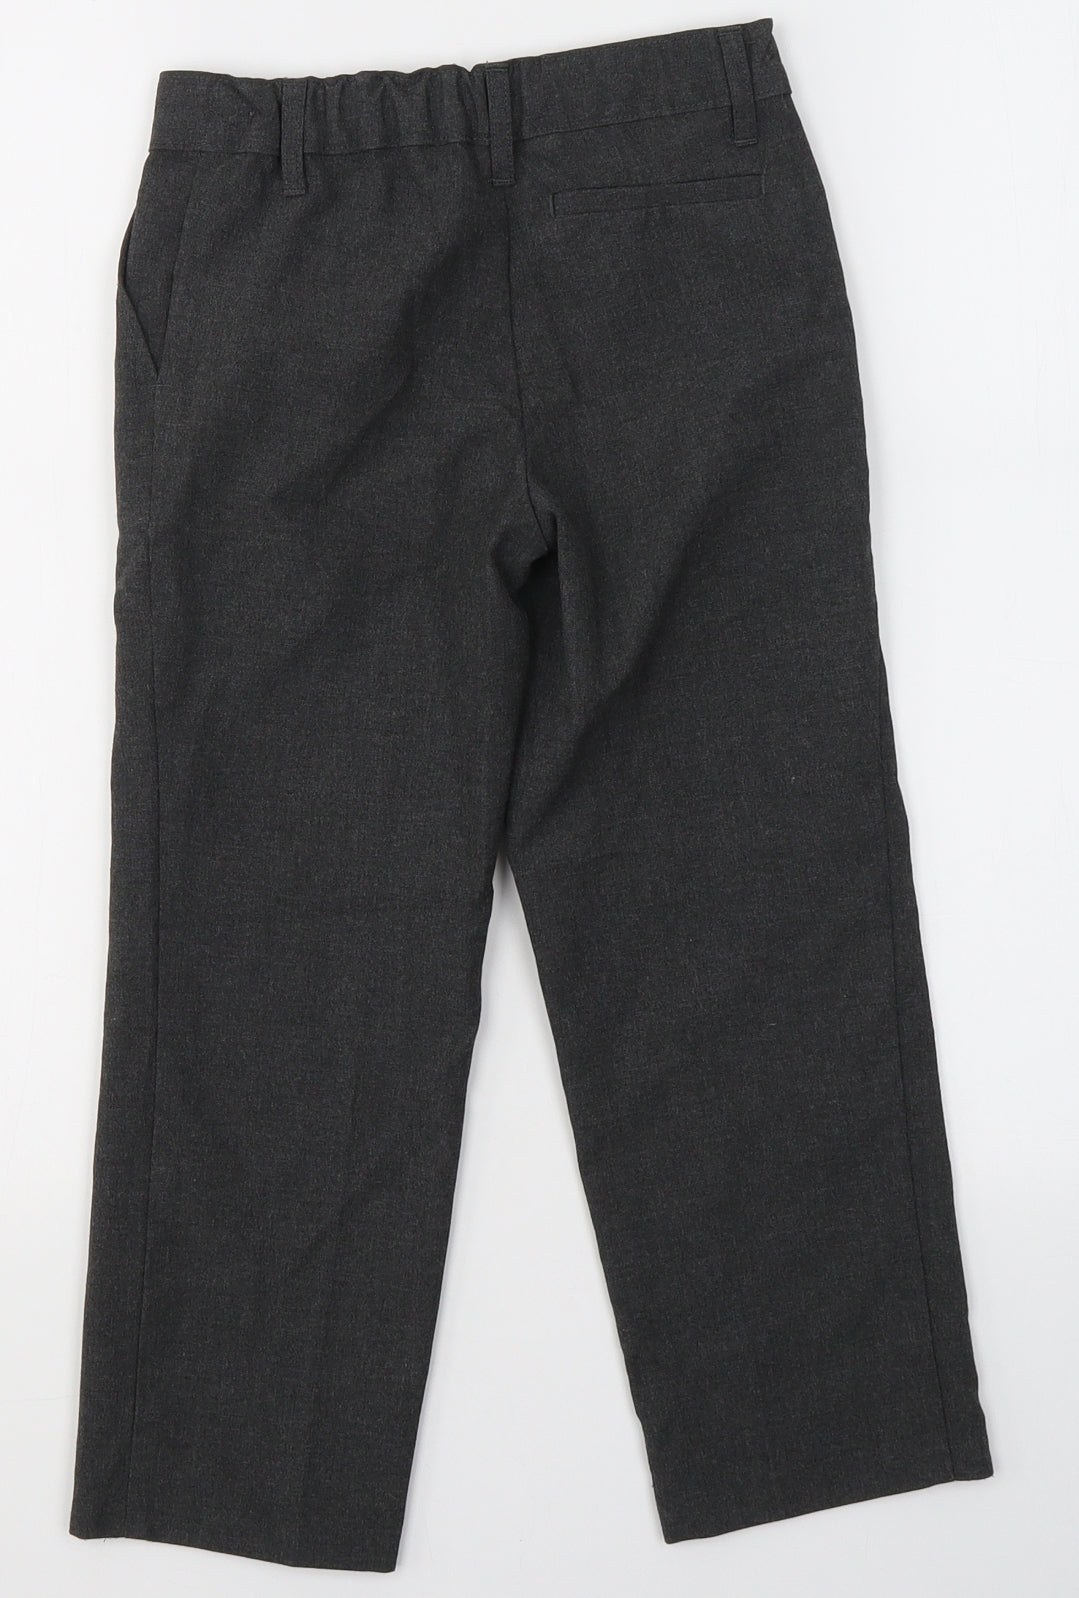 Marks and Spencer Boys Grey  Polyester Chino Trousers Size 3-4 Years  Regular  - school trousers